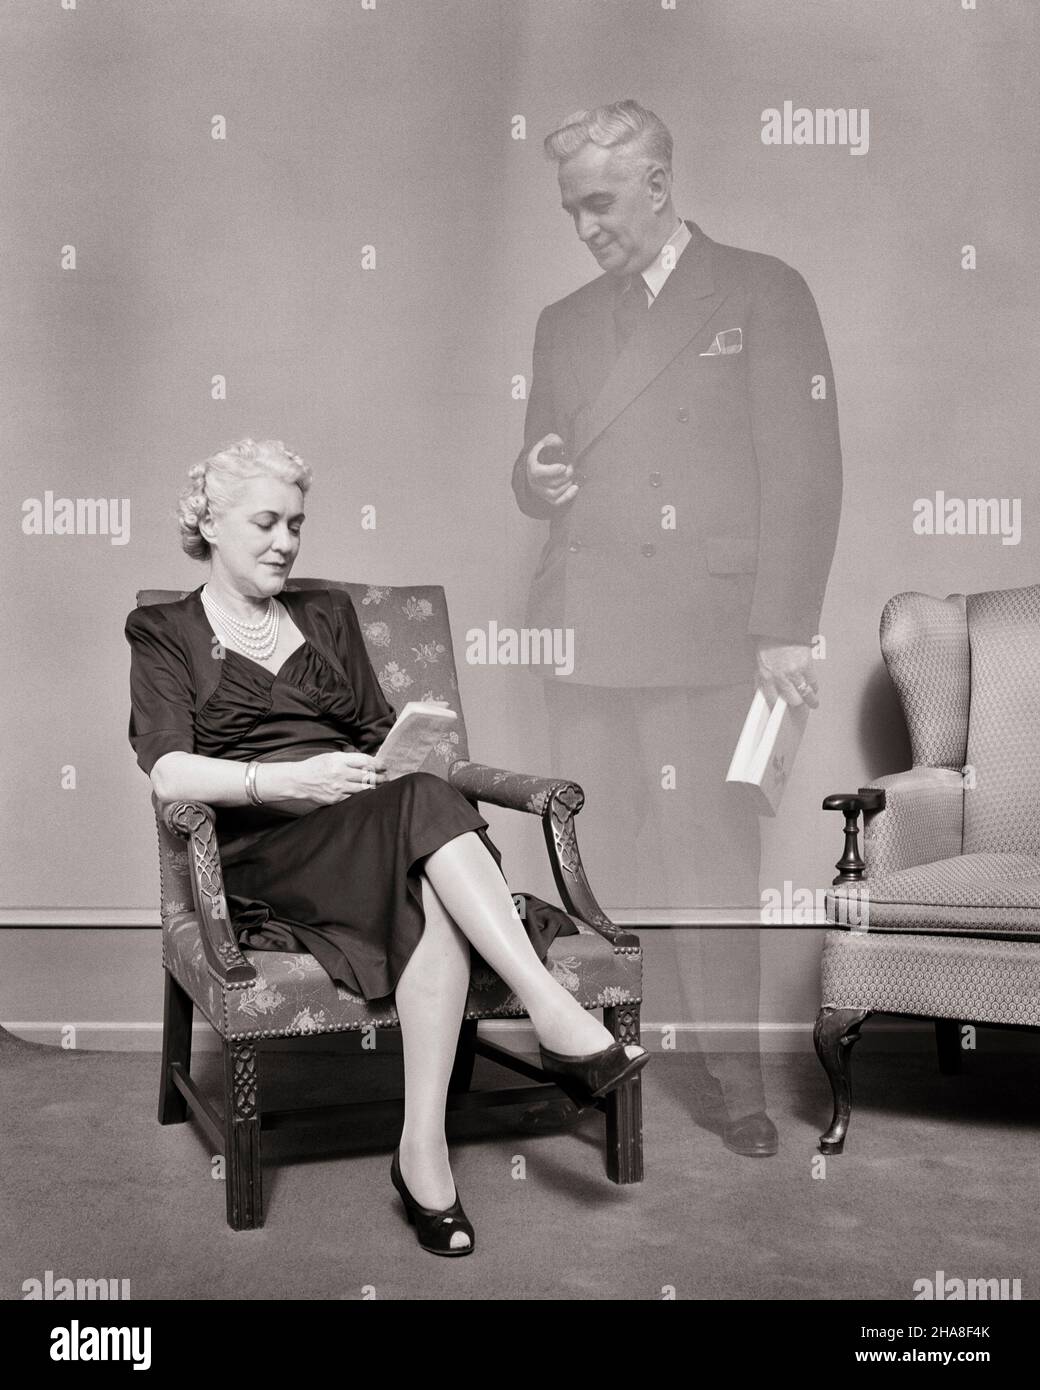 1940s WIDOWED SENIOR WOMAN SITTING IN CHAIR READING WITH SPIRIT OF HER DEAD HUSBAND GHOSTED STANDING BESIDE HER - s4829 HAR001 HARS HAUNTED COPY SPACE LADIES PERSONS INSPIRATION CARING MALES SPIRITUALITY SENIOR MAN DEAD SENIOR ADULT B&W PARTNER SENIOR WOMAN DREAMS SPIRIT OLD AGE OLDSTERS OLDSTER ELDERS CONNECTION WIDOW PHANTOM BESIDE IMAGINATION SUPPORT GHOSTED PANORAMIC PERSONAL ATTACHMENT AFFECTION EMOTION WIDOWED WIVES BLACK AND WHITE CAUCASIAN ETHNICITY HAR001 OLD FASHIONED Stock Photo